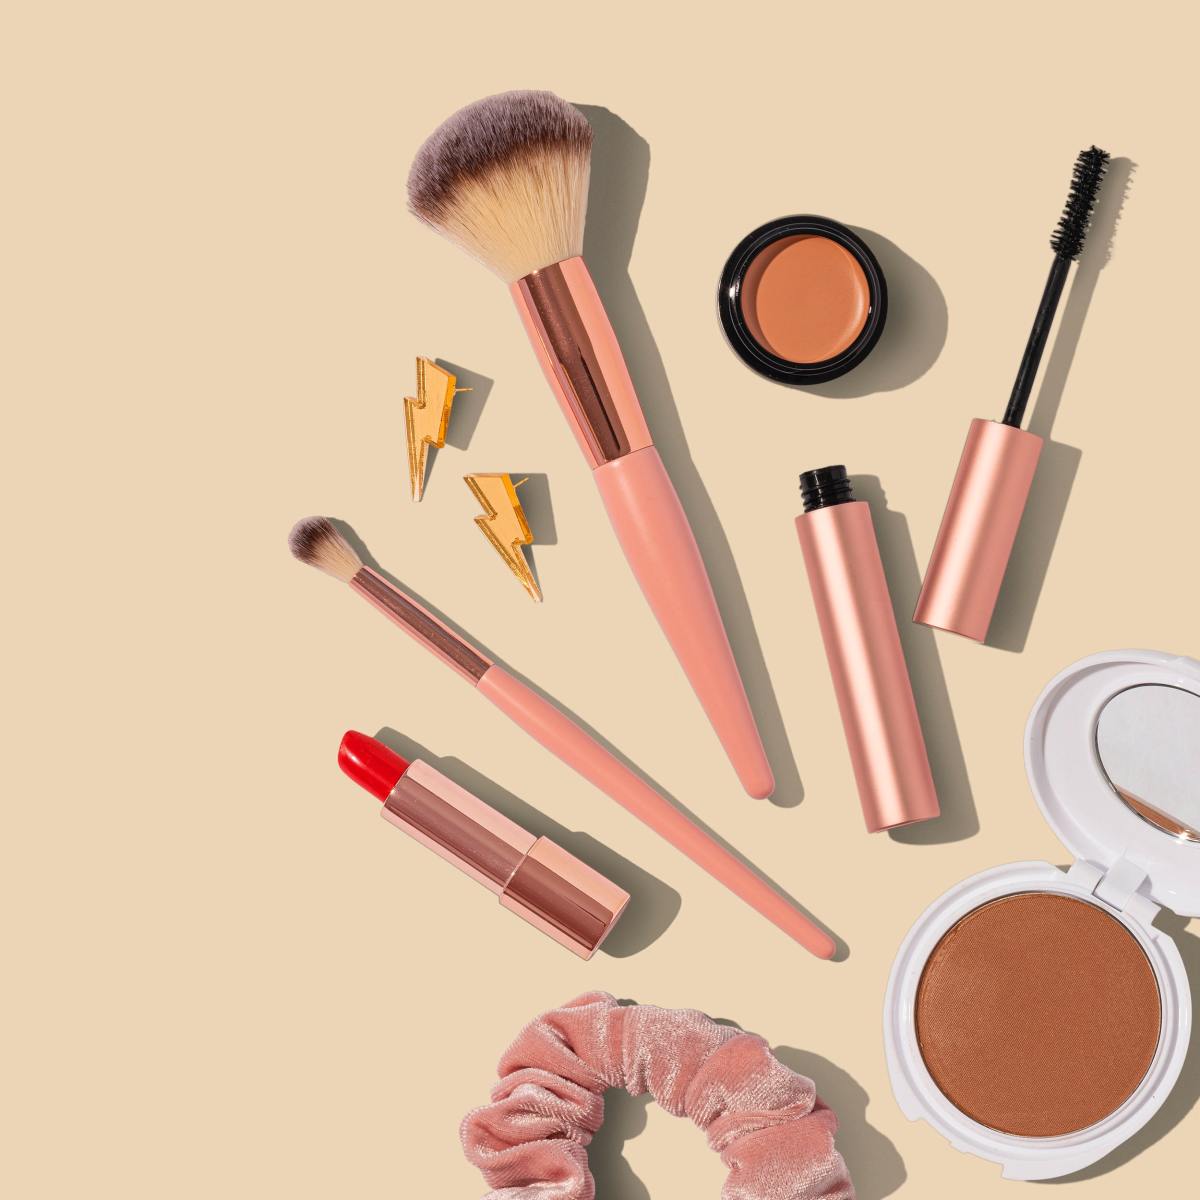 Beauty on a Budget: Put Your Best Face Forward